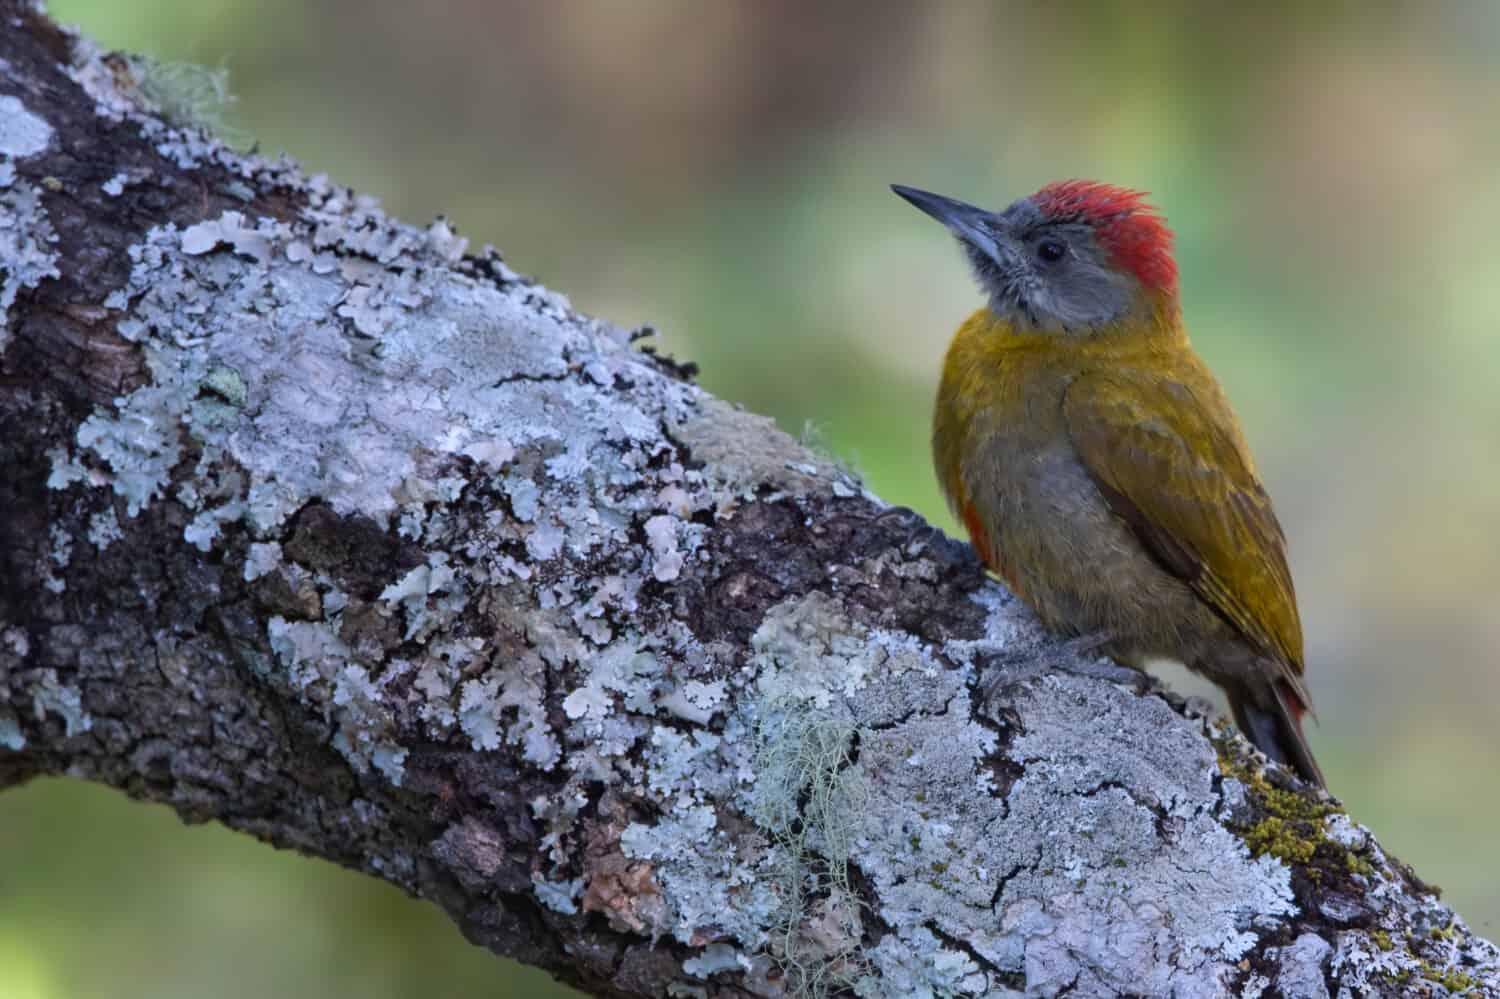 Olive Woodpecker (Dendropicos griseocephalus) perched in a tree in Angola.